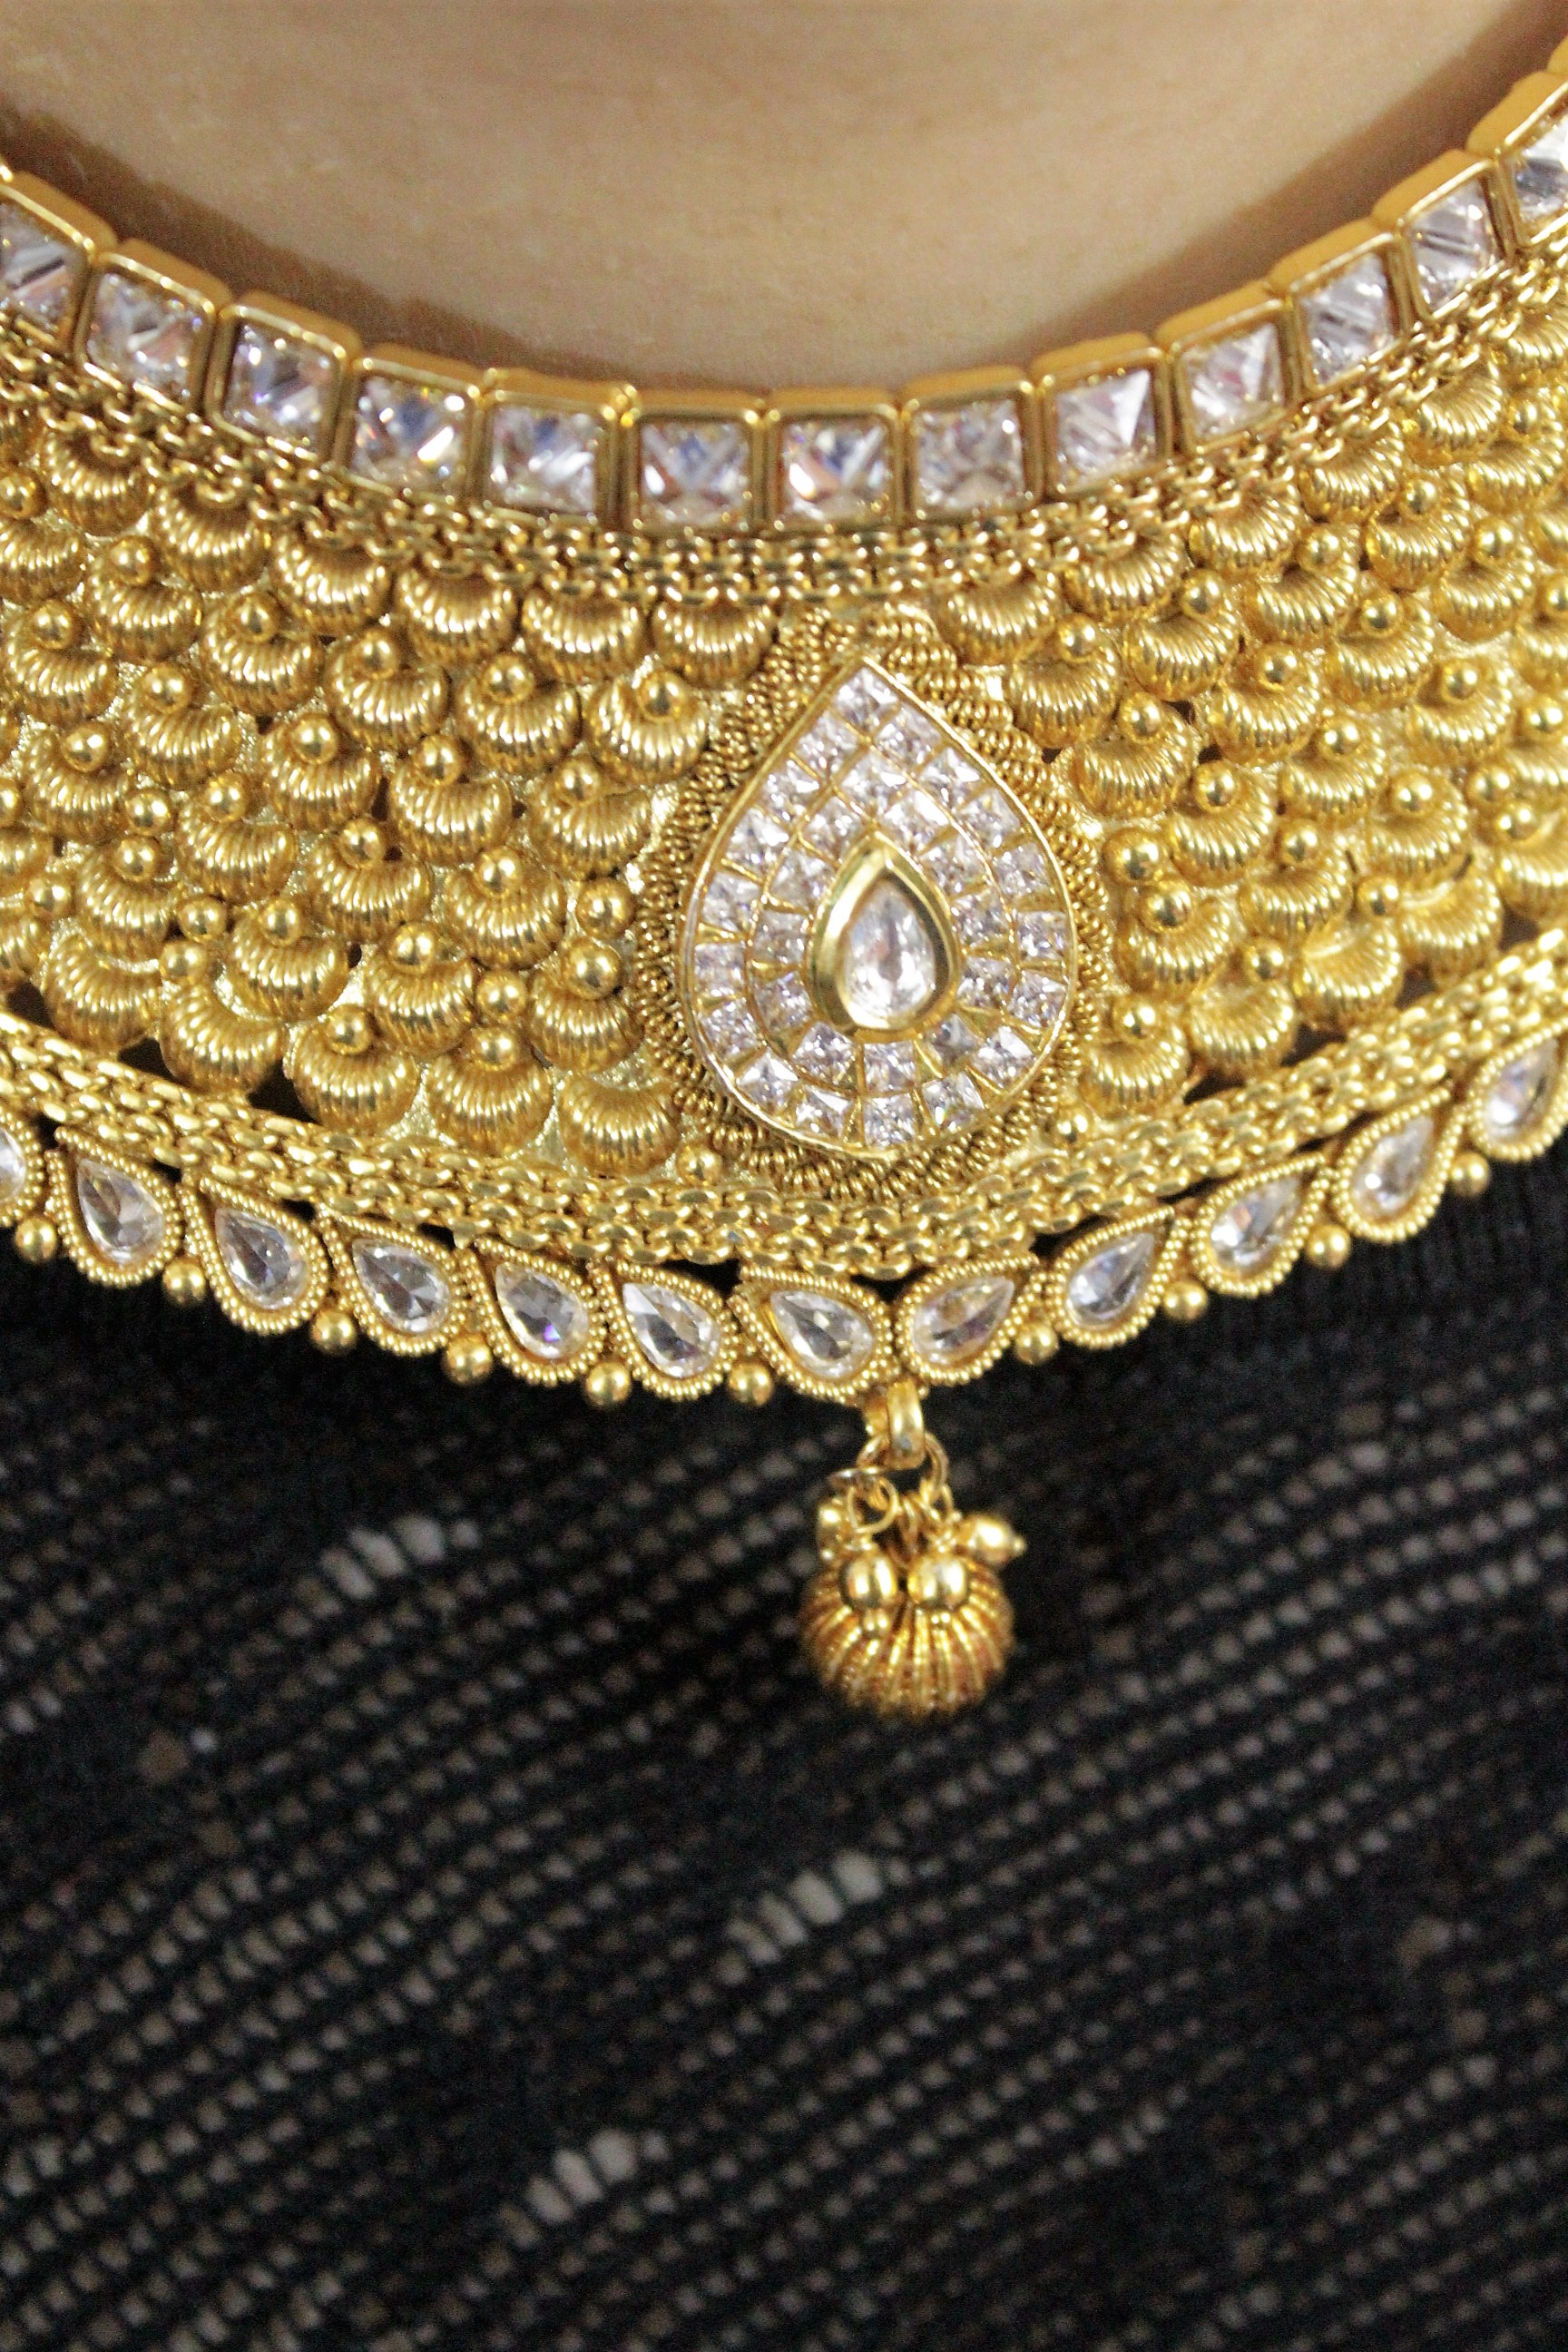  Rajasthani Artificial Jewellery Set in Chandigarh  | IndiHaute | Rajasthani Artificial Jewellery Set in Chandigarh,Rajasthani maang tikka in Chandigarh,Rajasthani Artificial Jewellery manufacturer in Chandigarh,Rajasthani Artificial Jewellery supplier in Chandigarh - GL42302